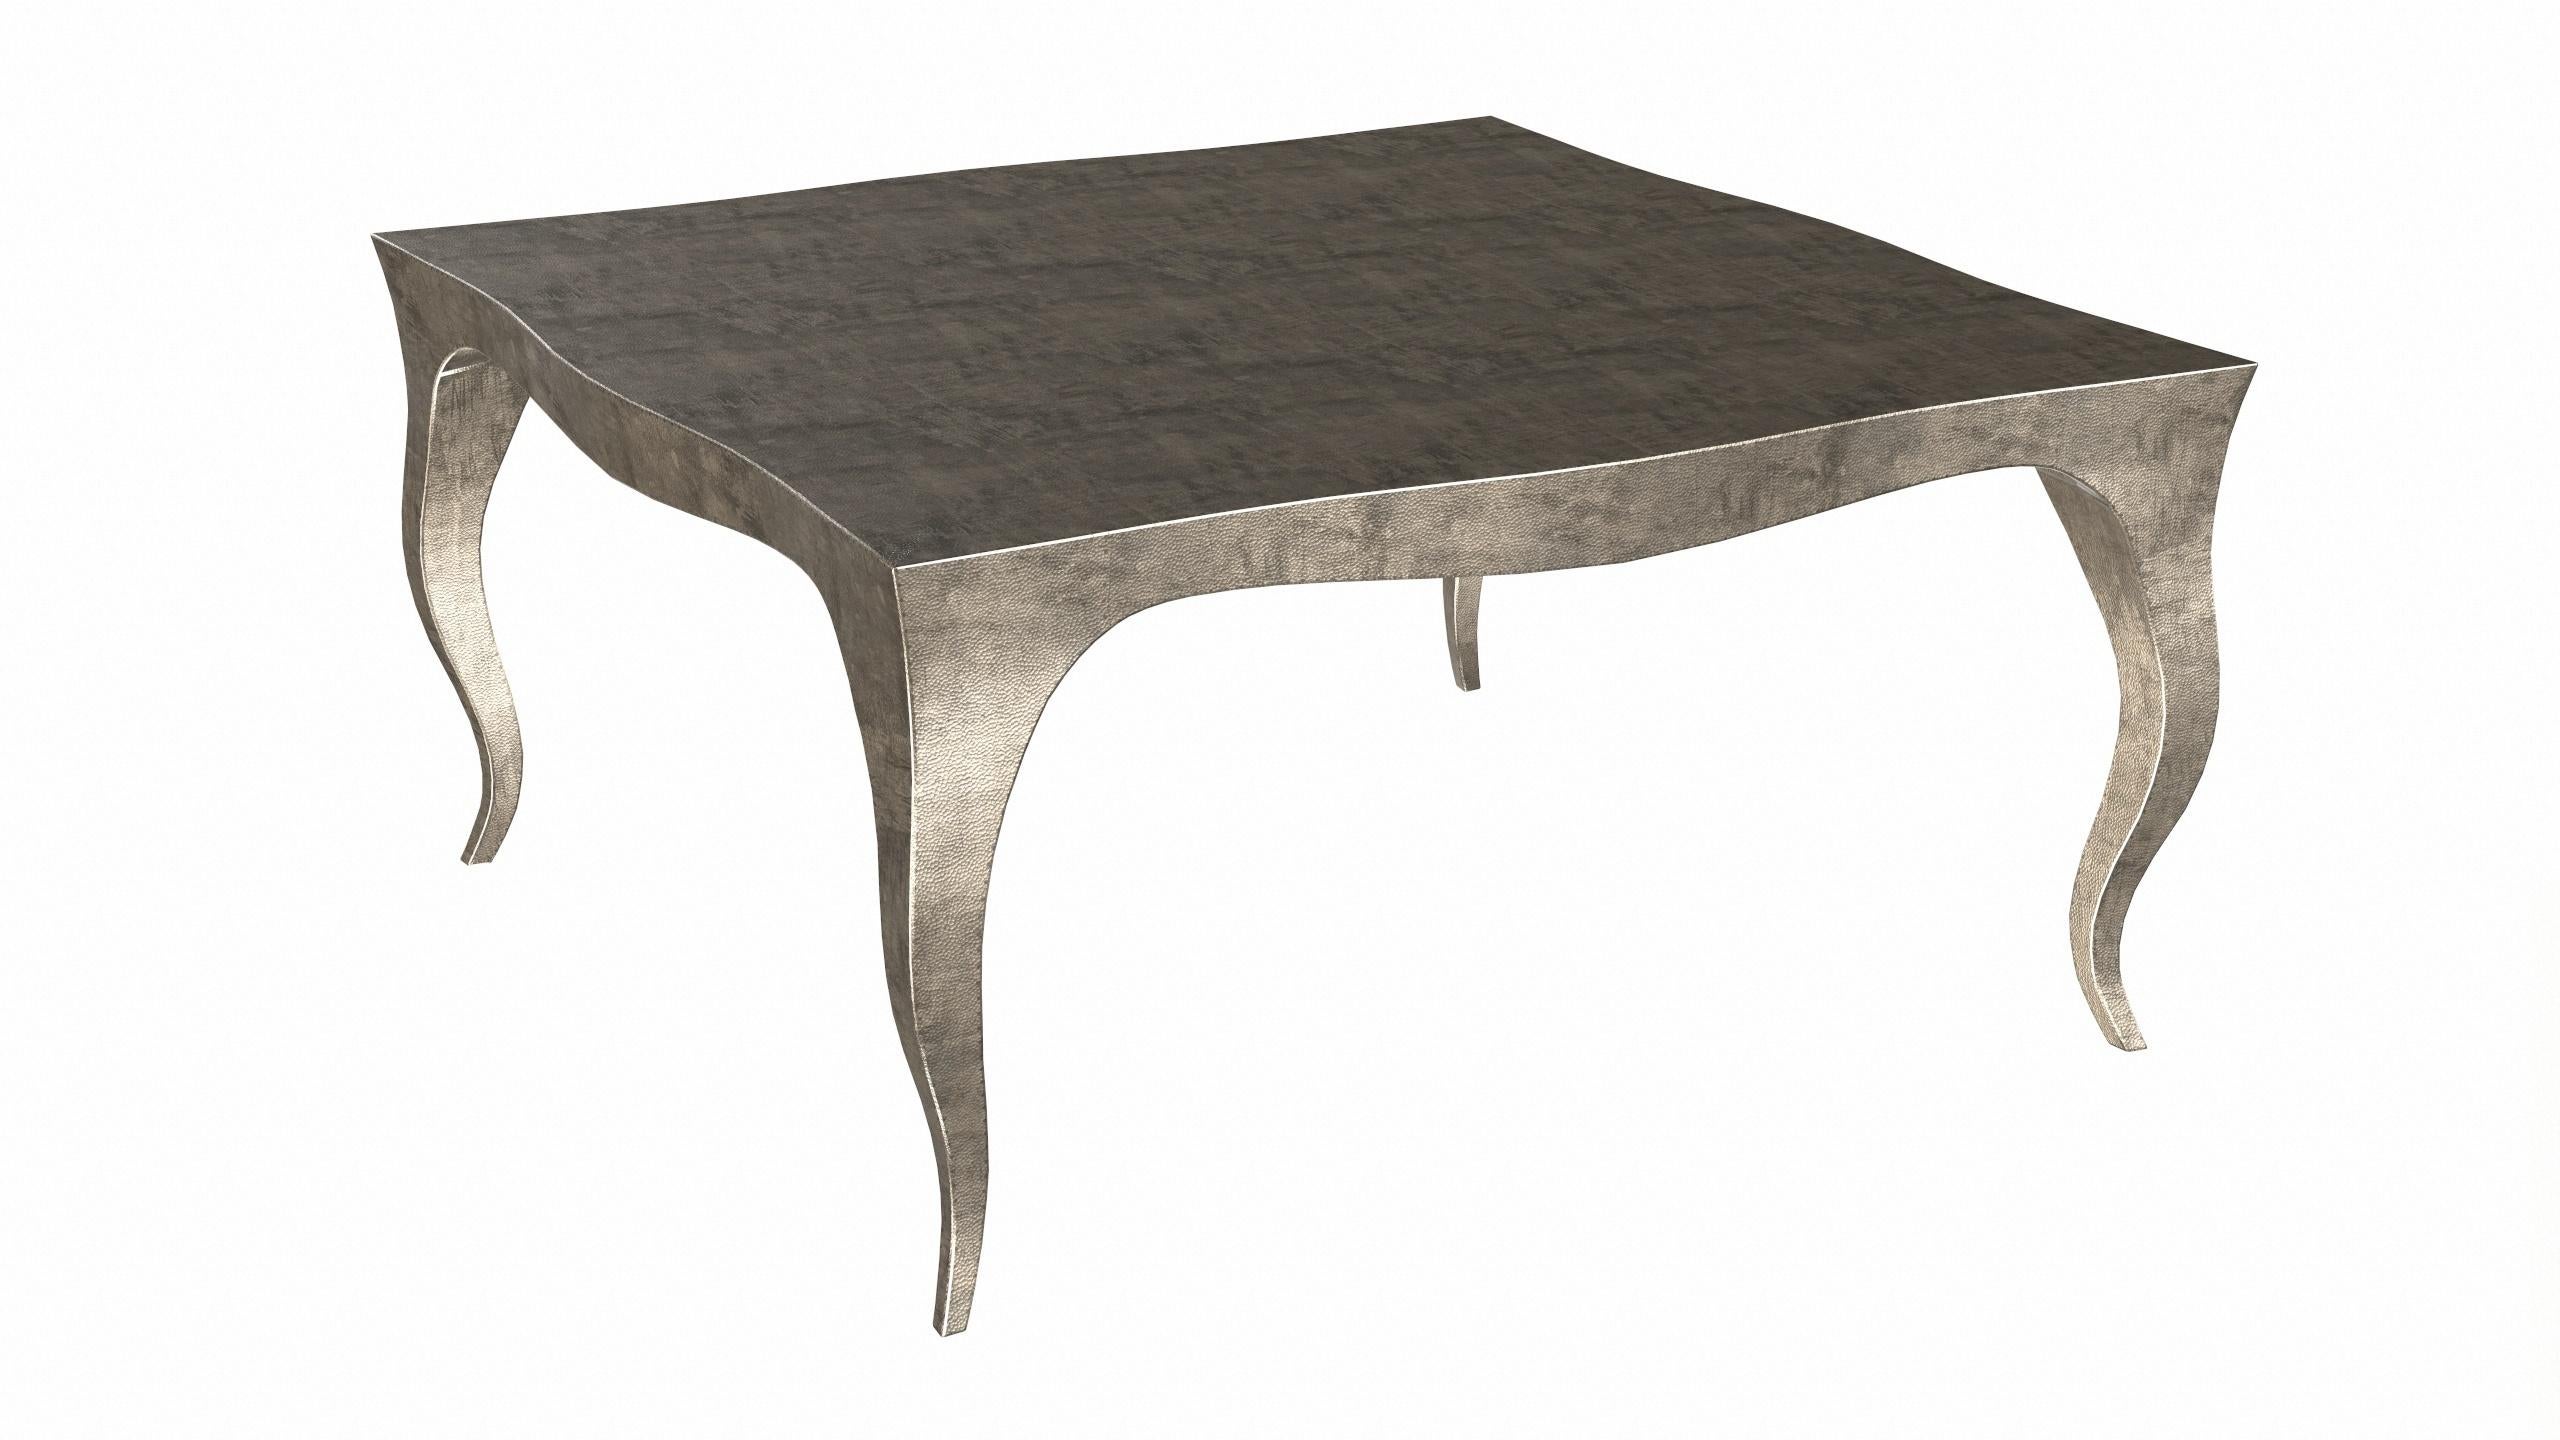 Hand-Carved Louise Art Deco Industrial Tables Mid. Hammered Antique Bronze 18.5x18.5x10 Inch For Sale